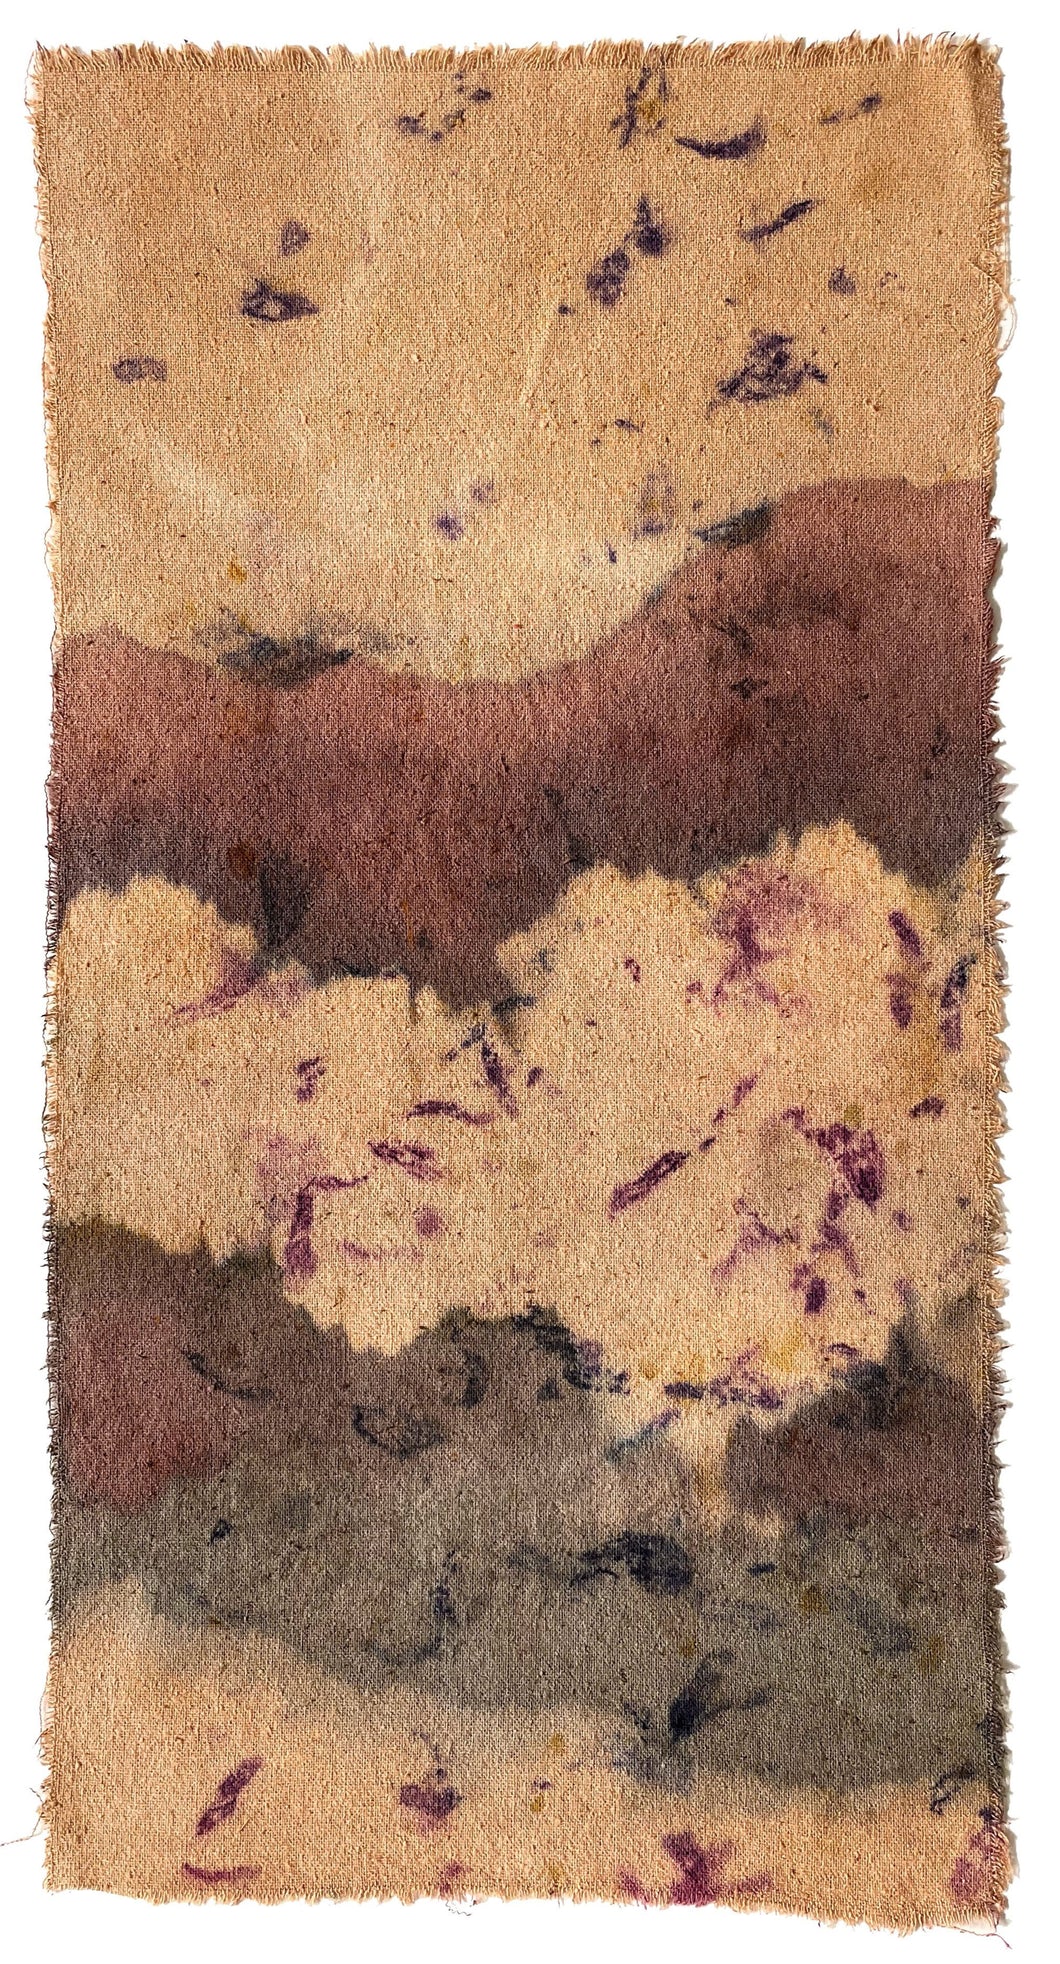 roots - naturally dyed textile